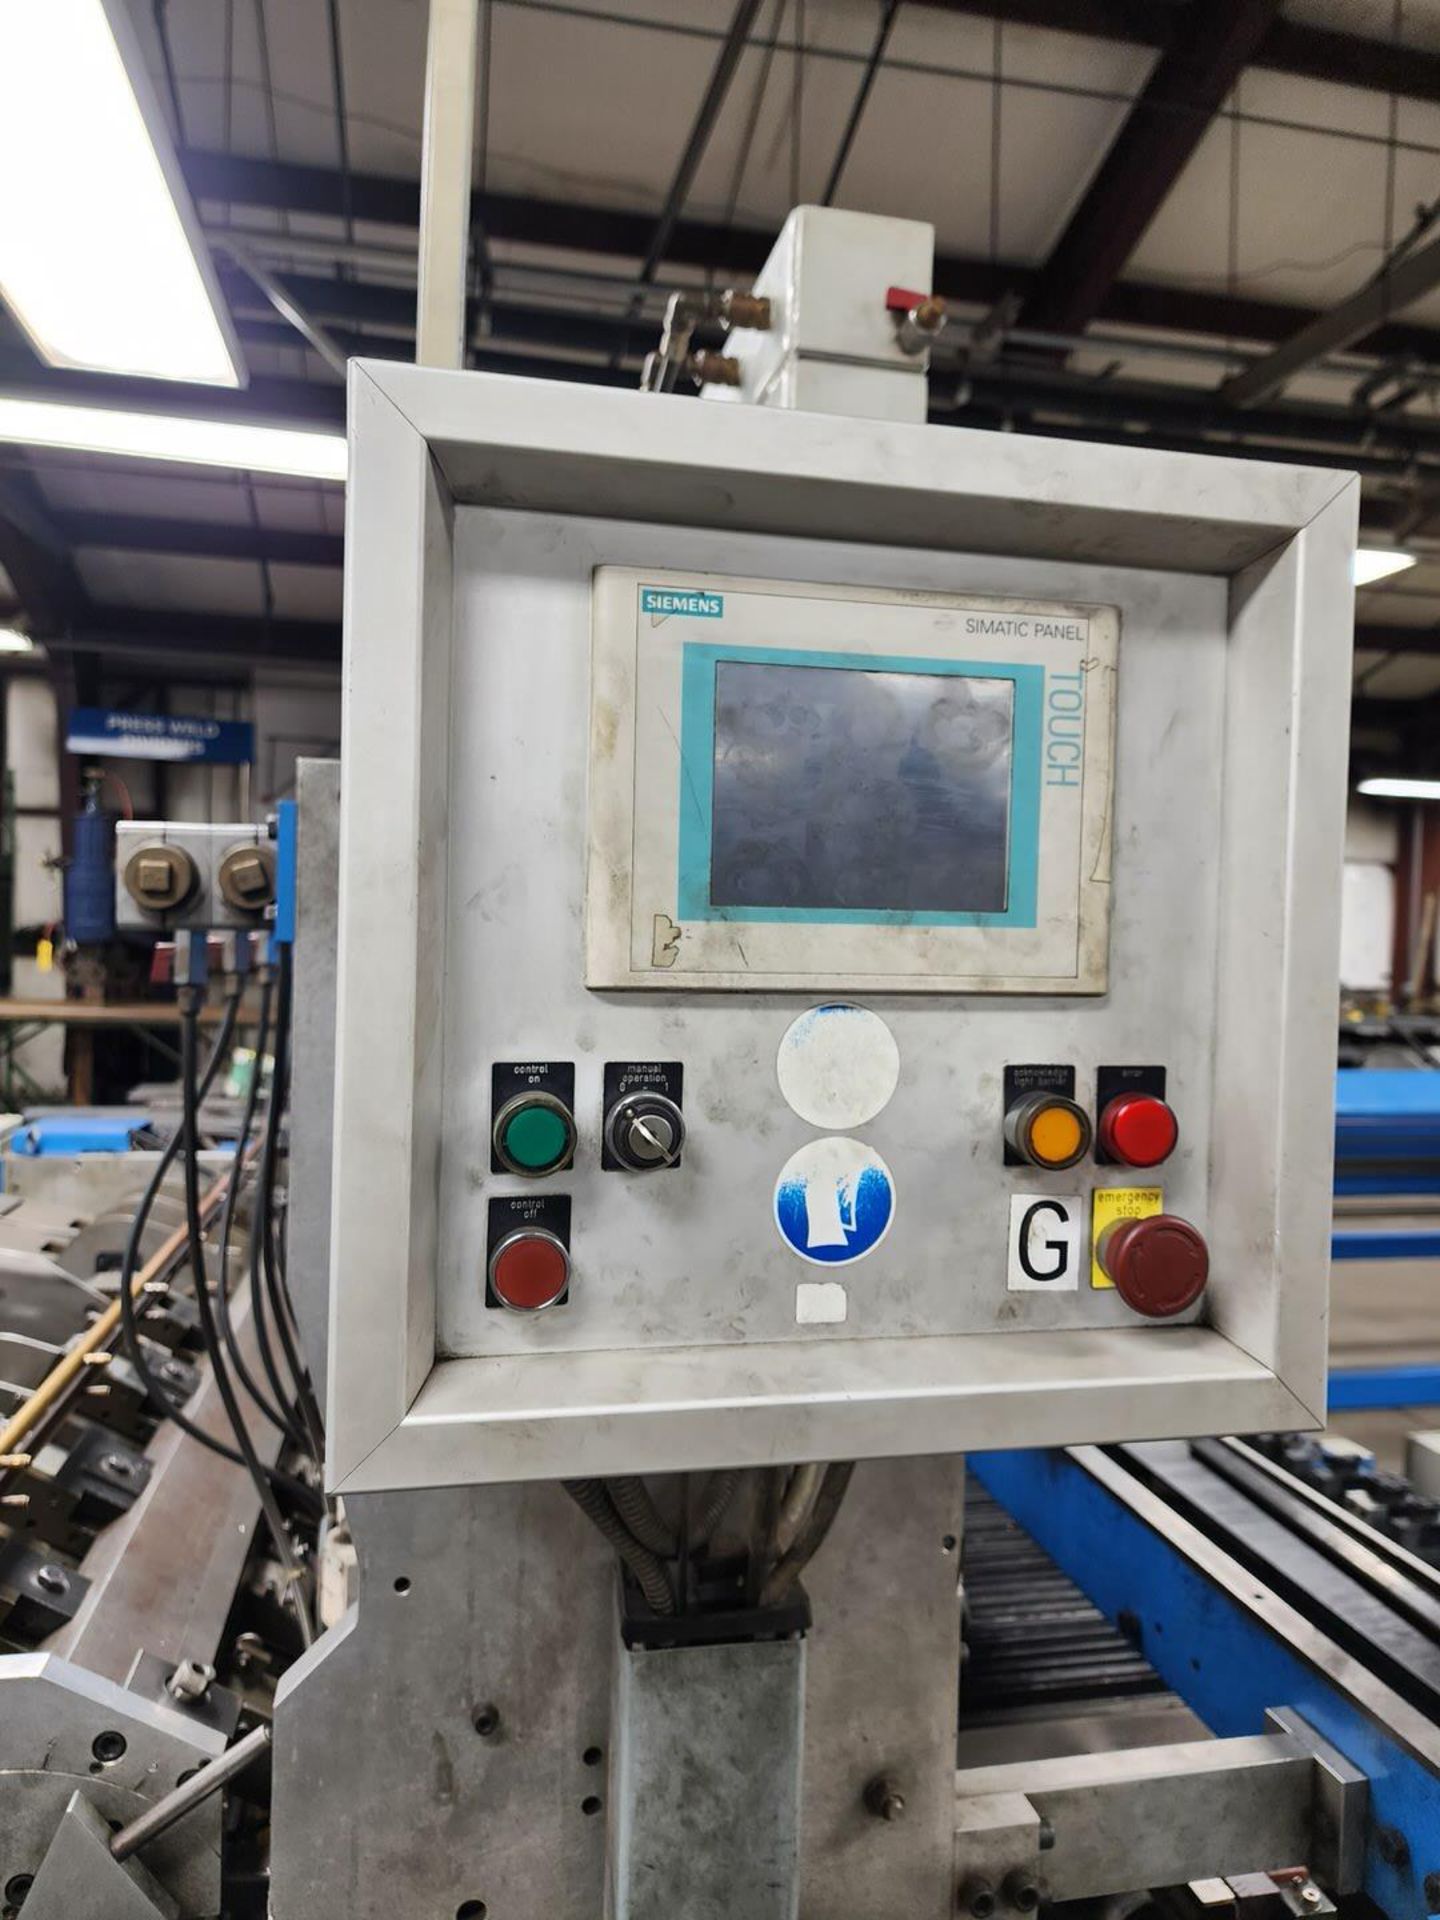 Ideal GAE516 CNC Wire Mesh Welder 50/60HZ, 480V, 1200A; W/ Siemens Simatic Panel Controller - Image 15 of 57